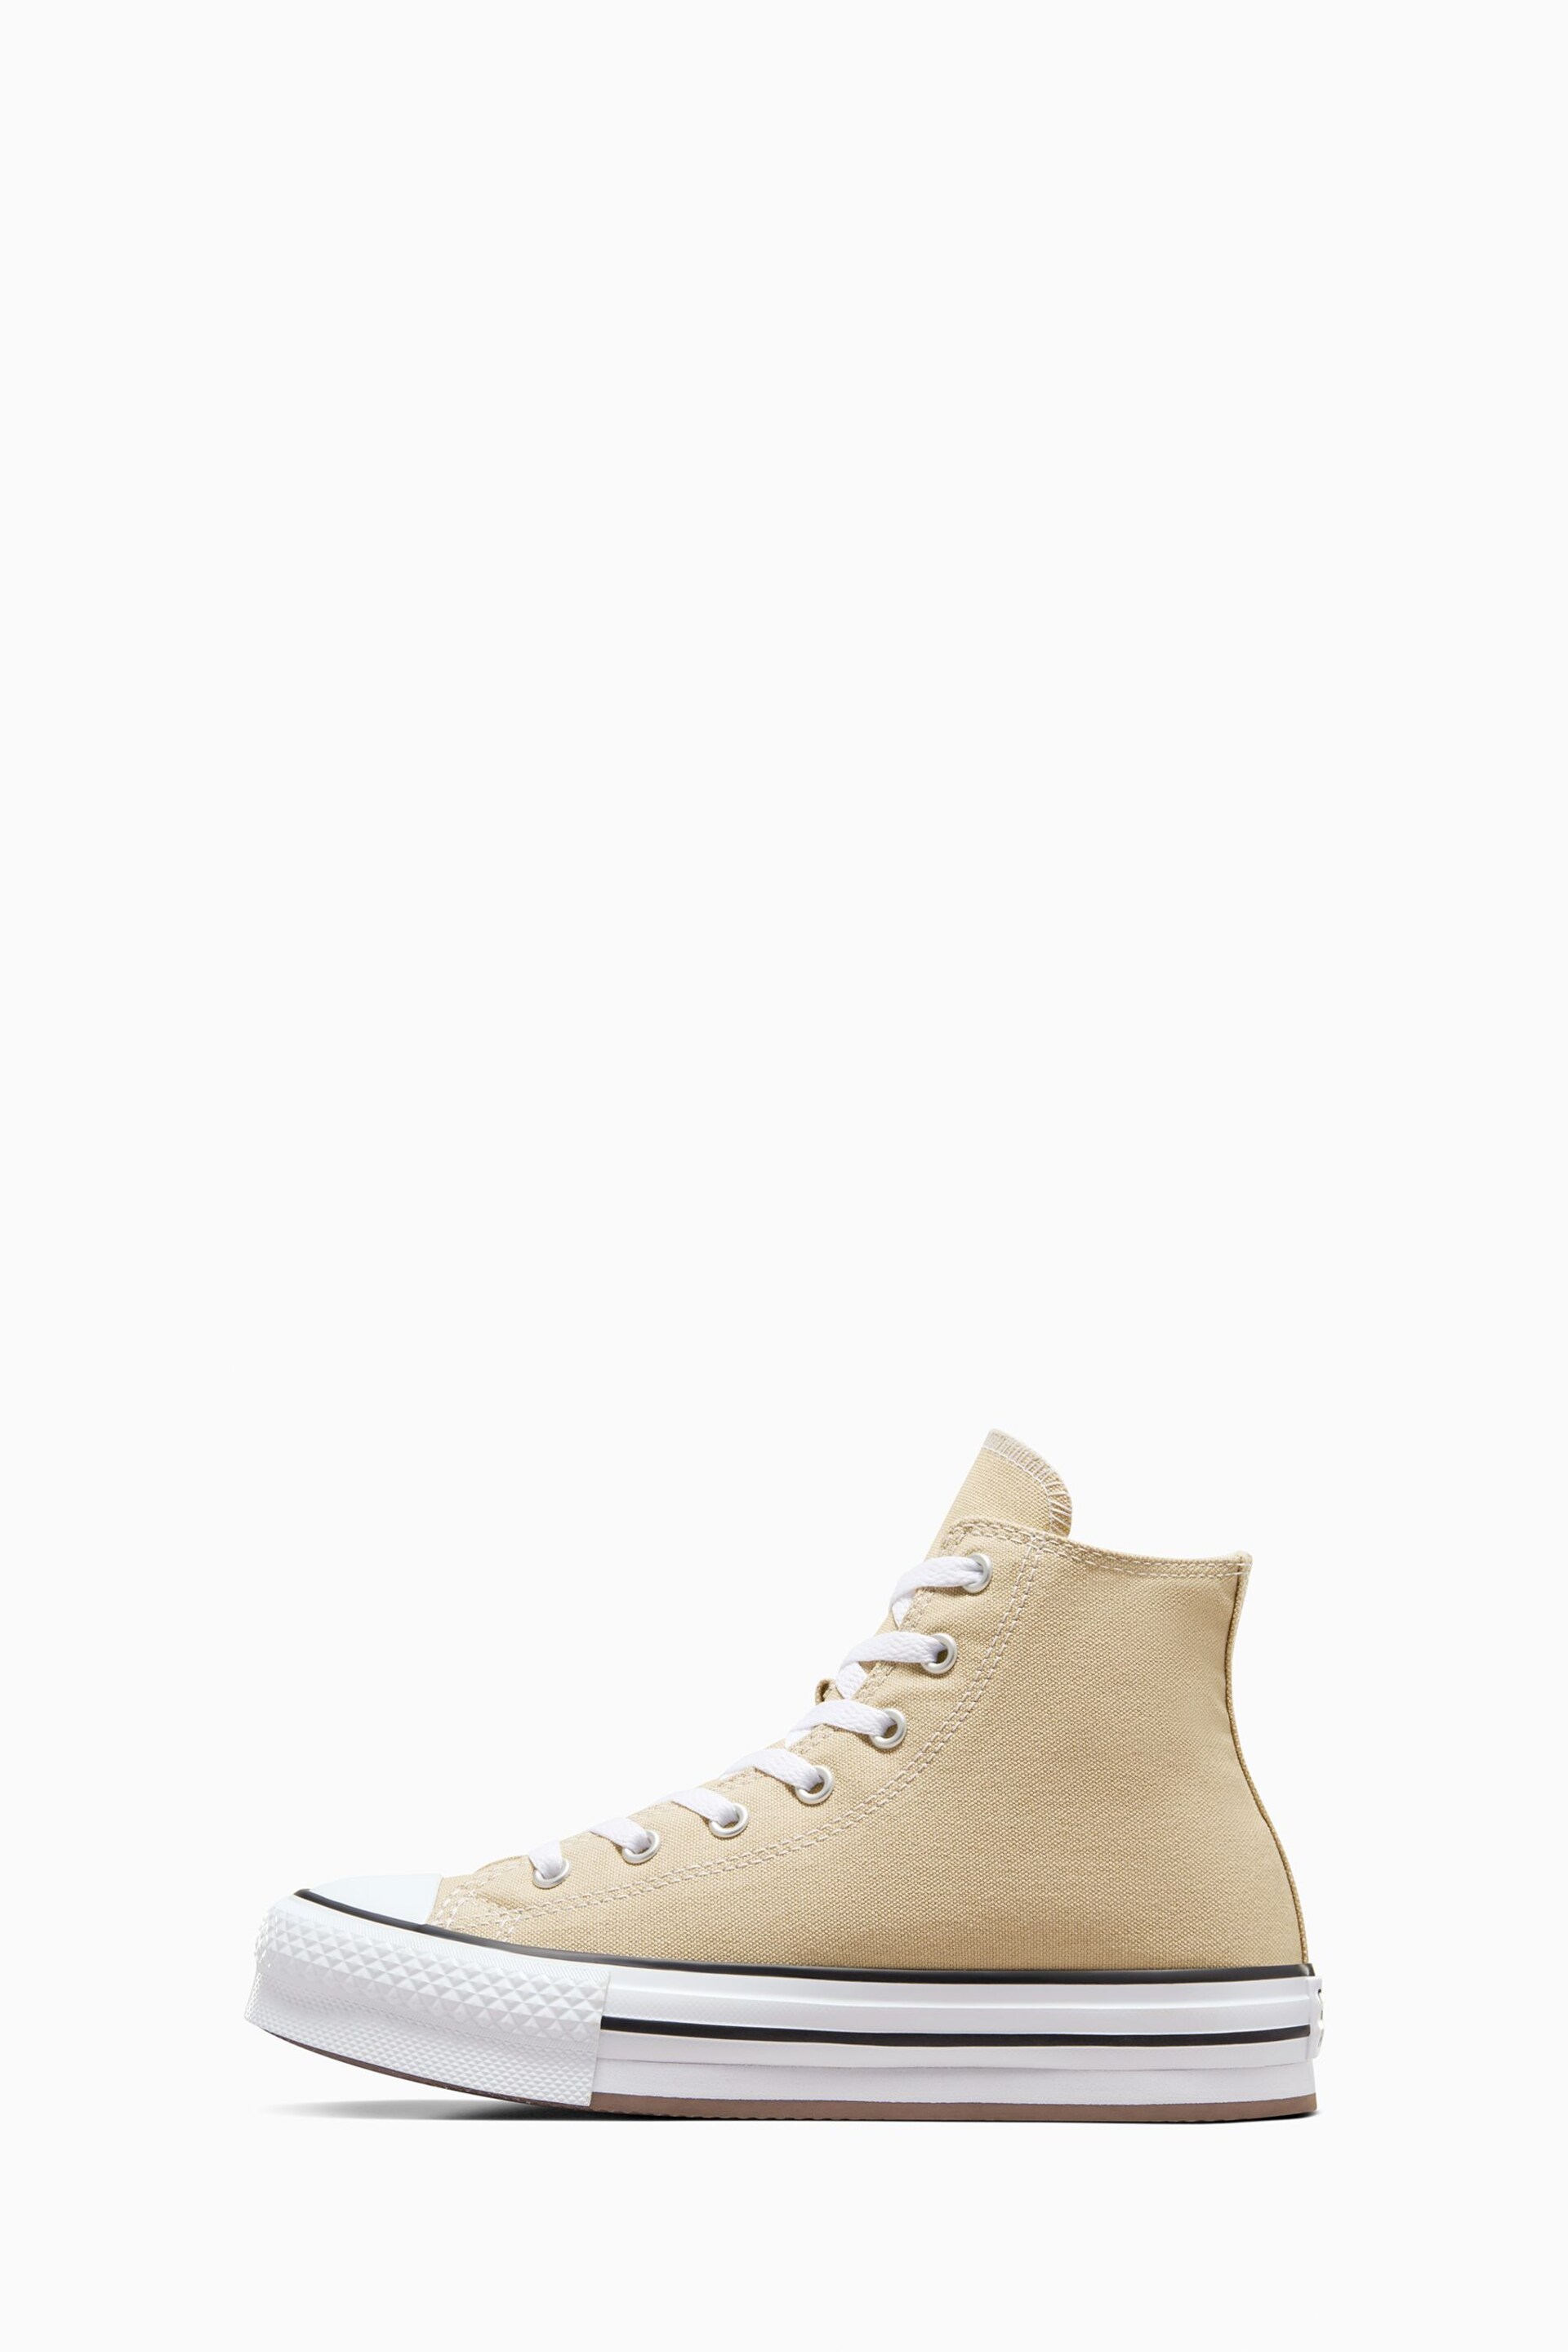 Converse Neutral All Star EVA Lift Junior Trainers - Image 2 of 7